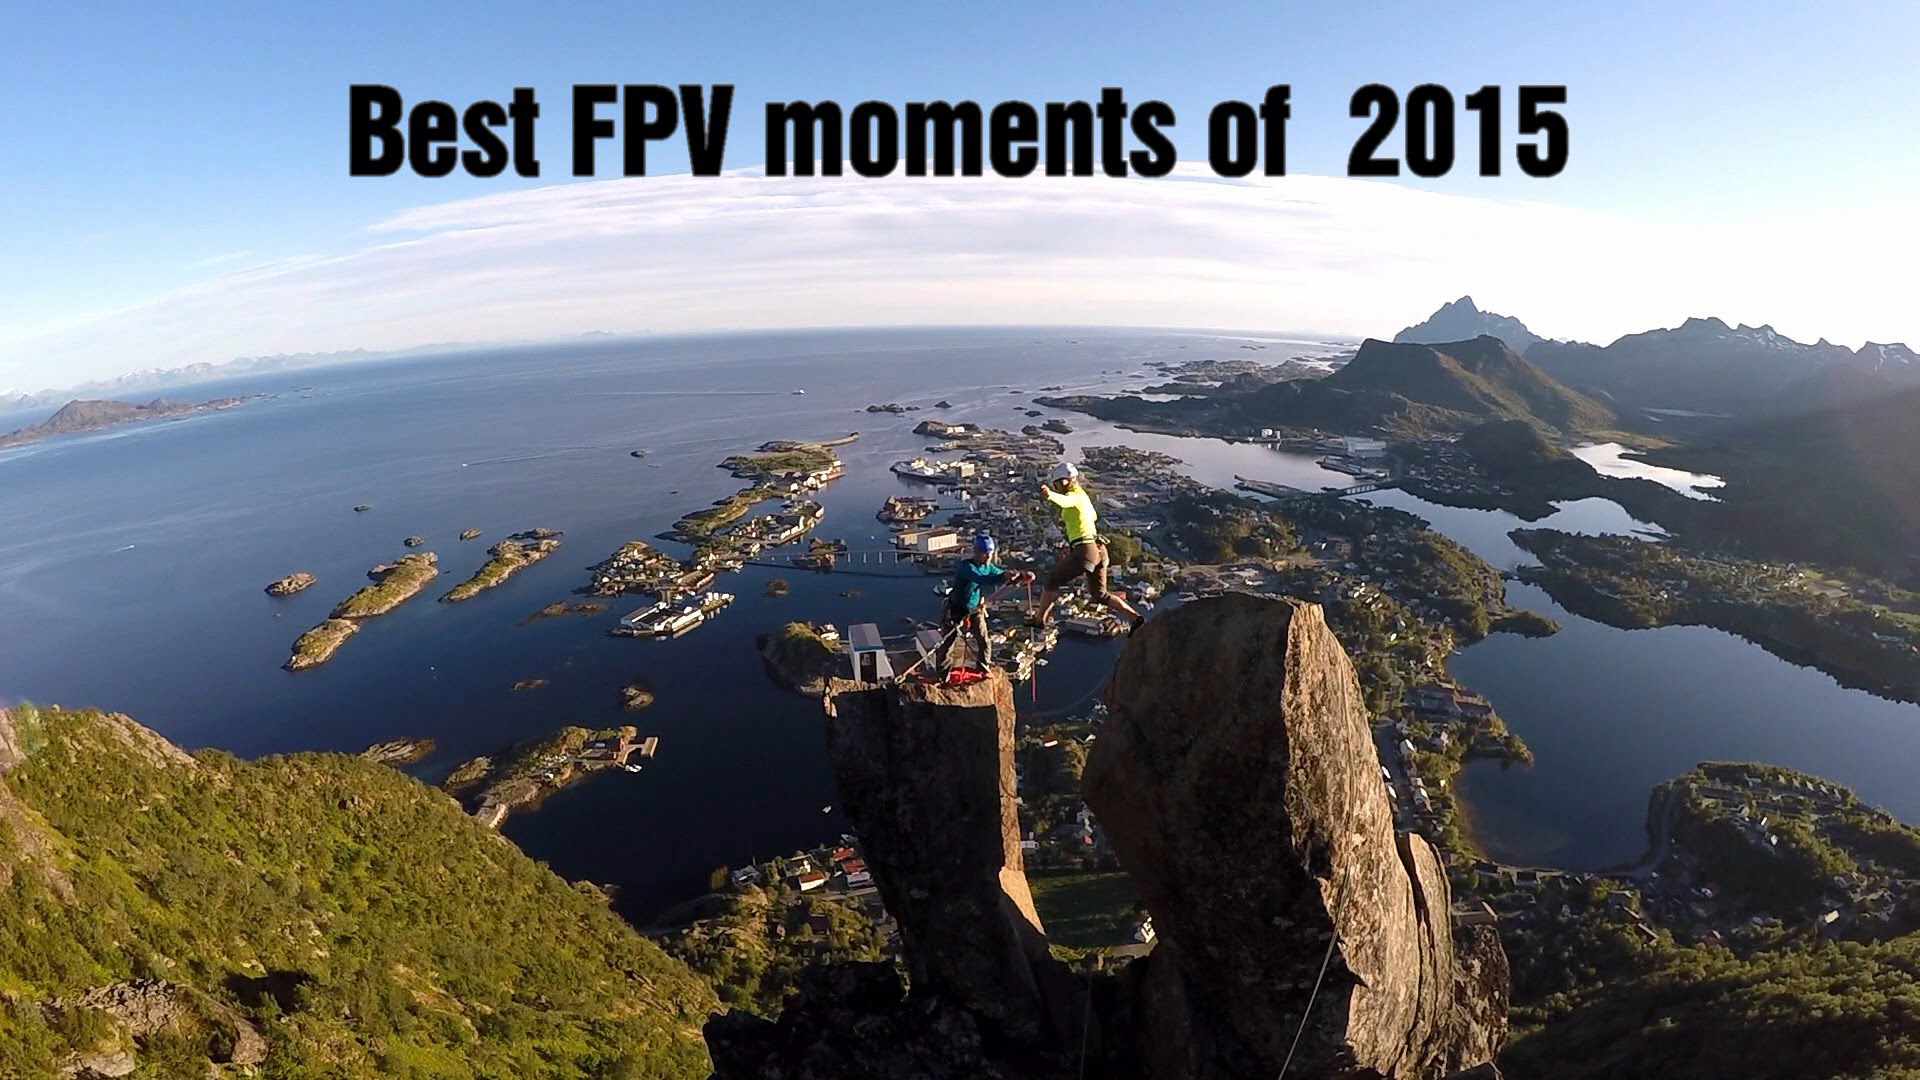 FPV Best moments of 2015